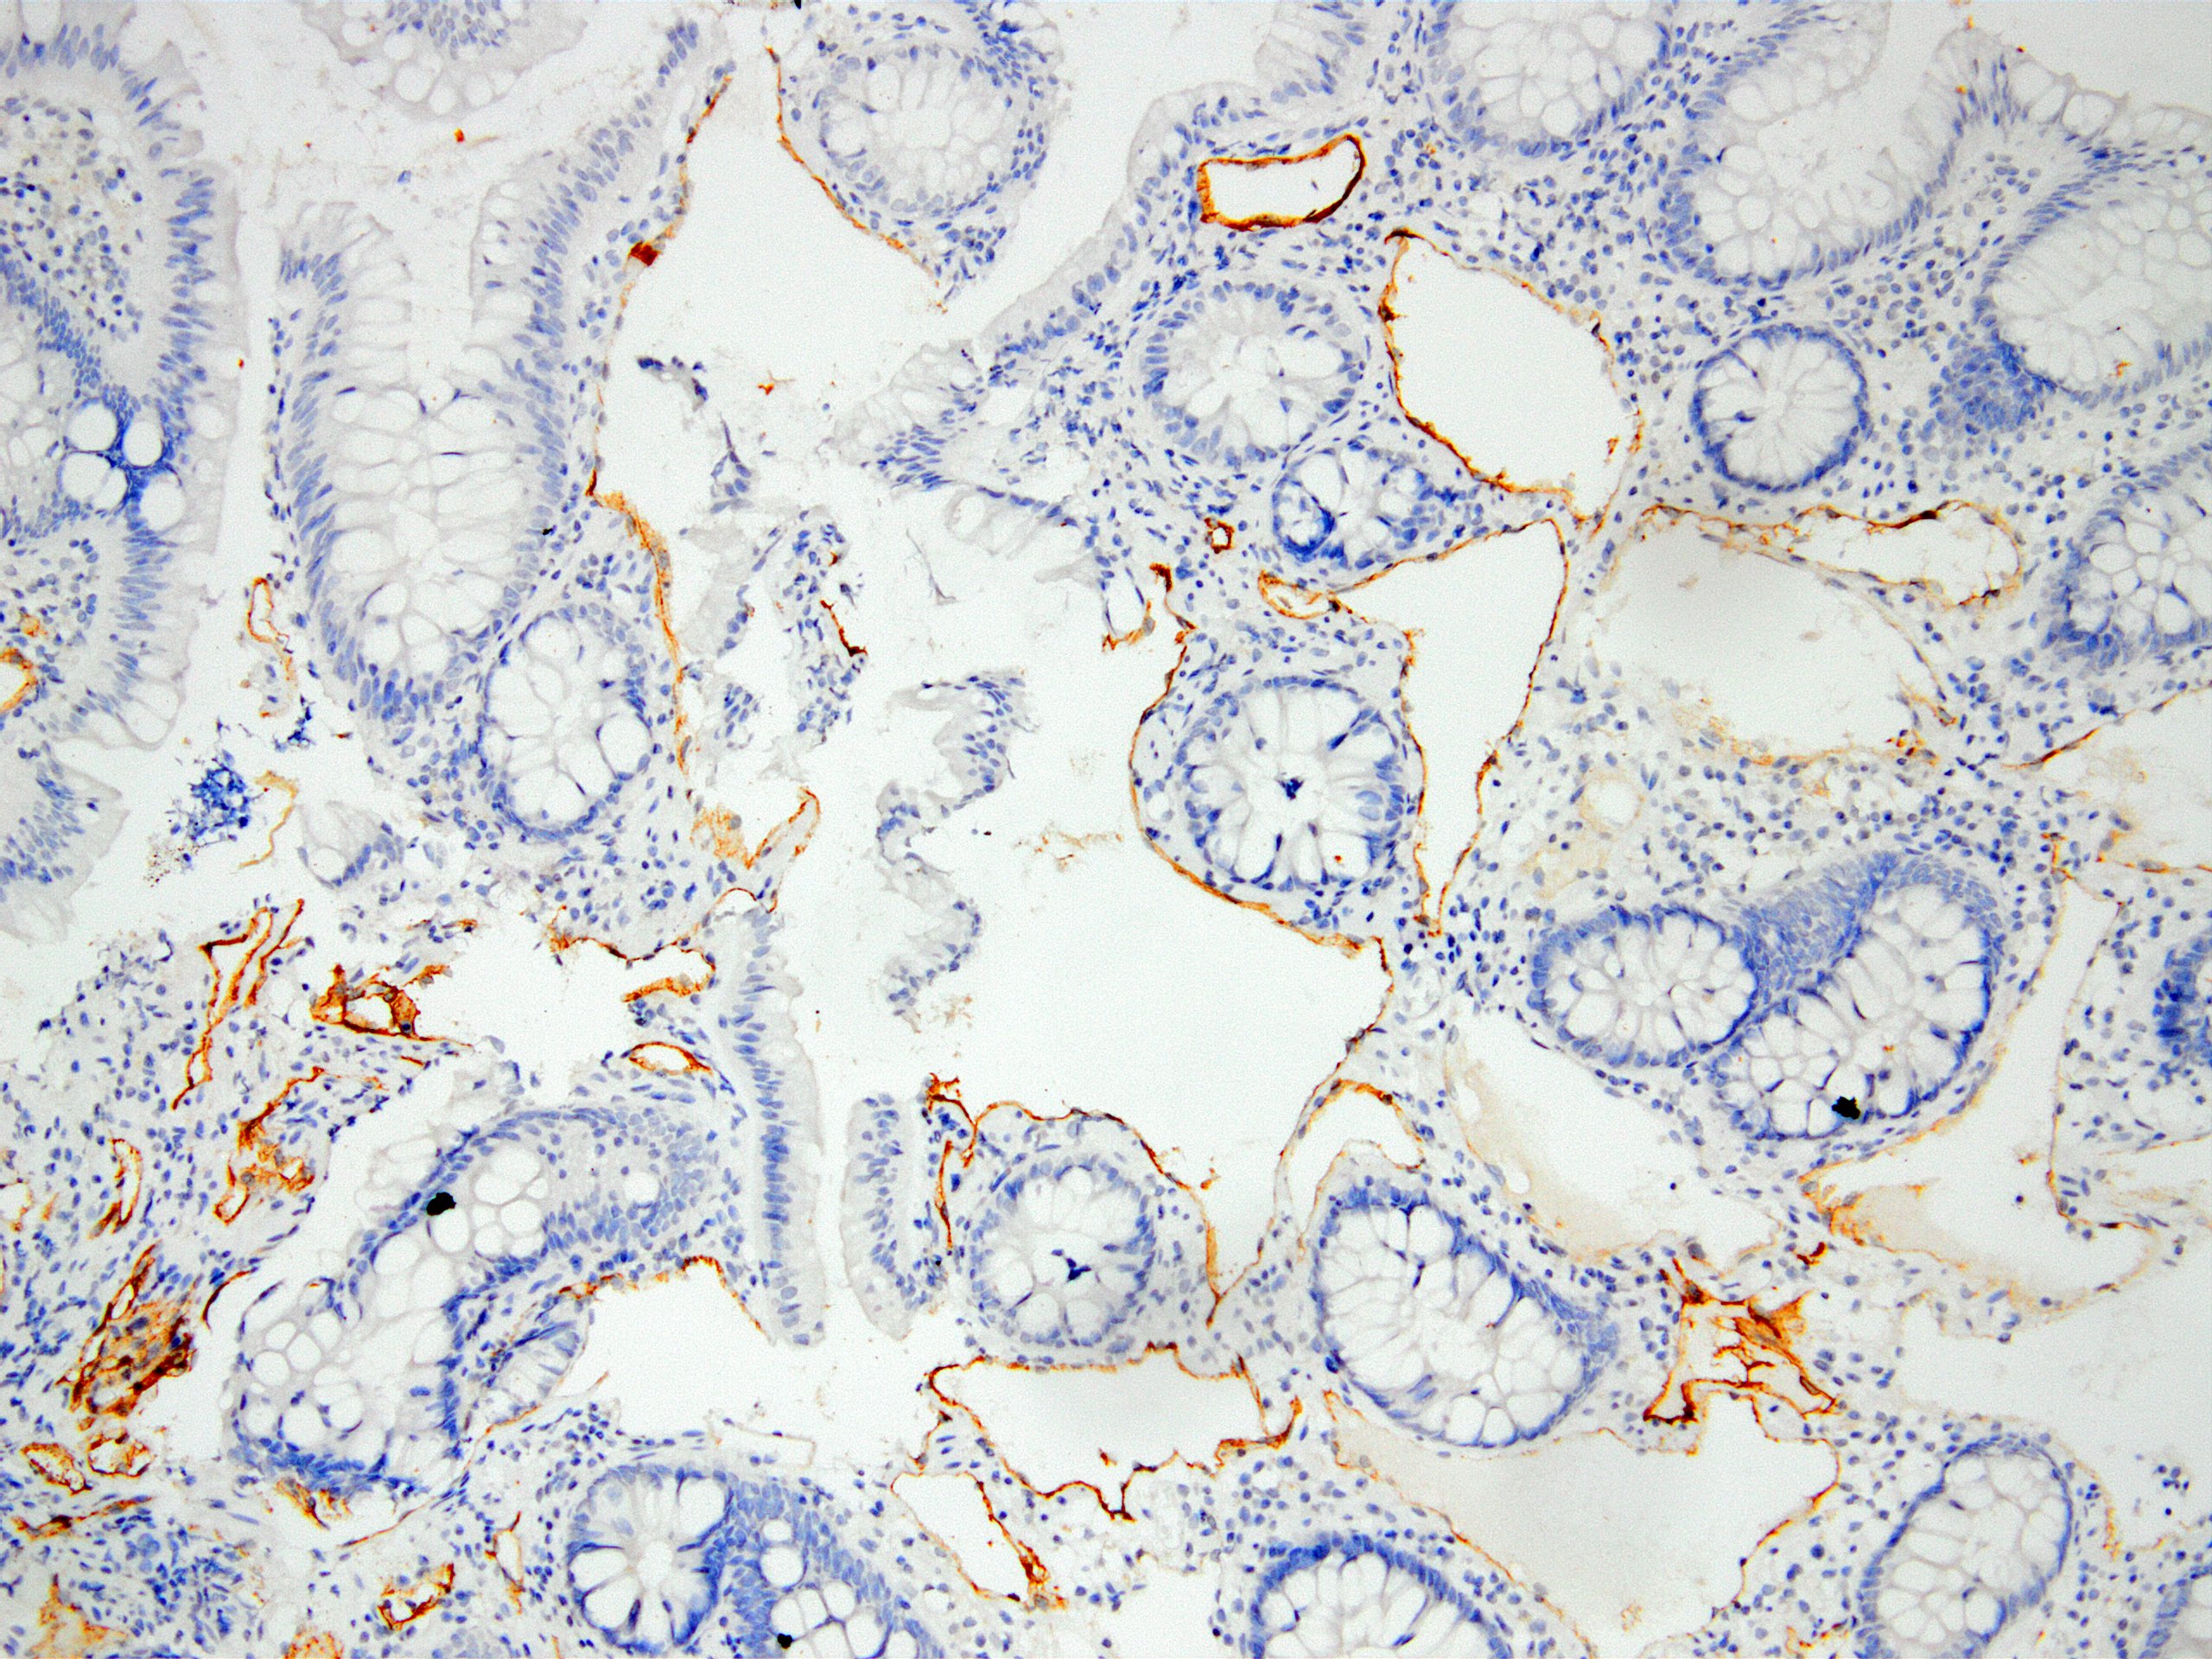 D2-40 in cecal lymphangioma 